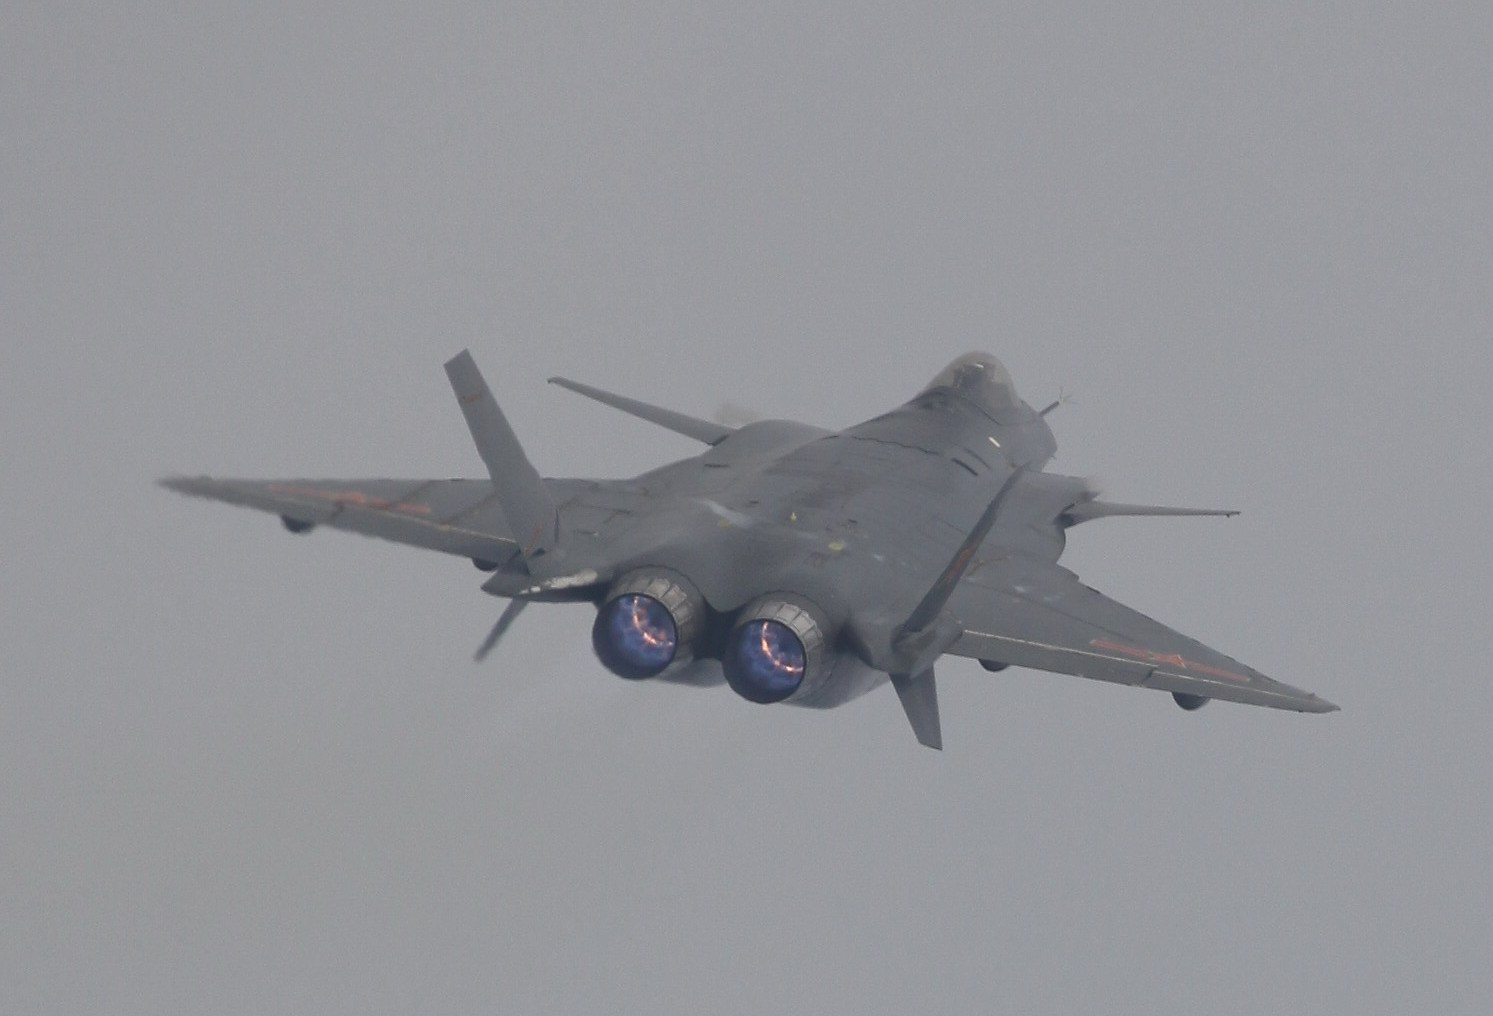 J-20+Mighty+Dragon++Chengdu+J-20+fifth+generation+stealth%252C+twin-engine+fighter+aircraft+prototype+People%2527s+Lib  eration+Army+Air+Force++OPERATIONAL+weapons+aam+bv  r+missile+ls+pgm+gps+plaaf+%25282%2529.jpg